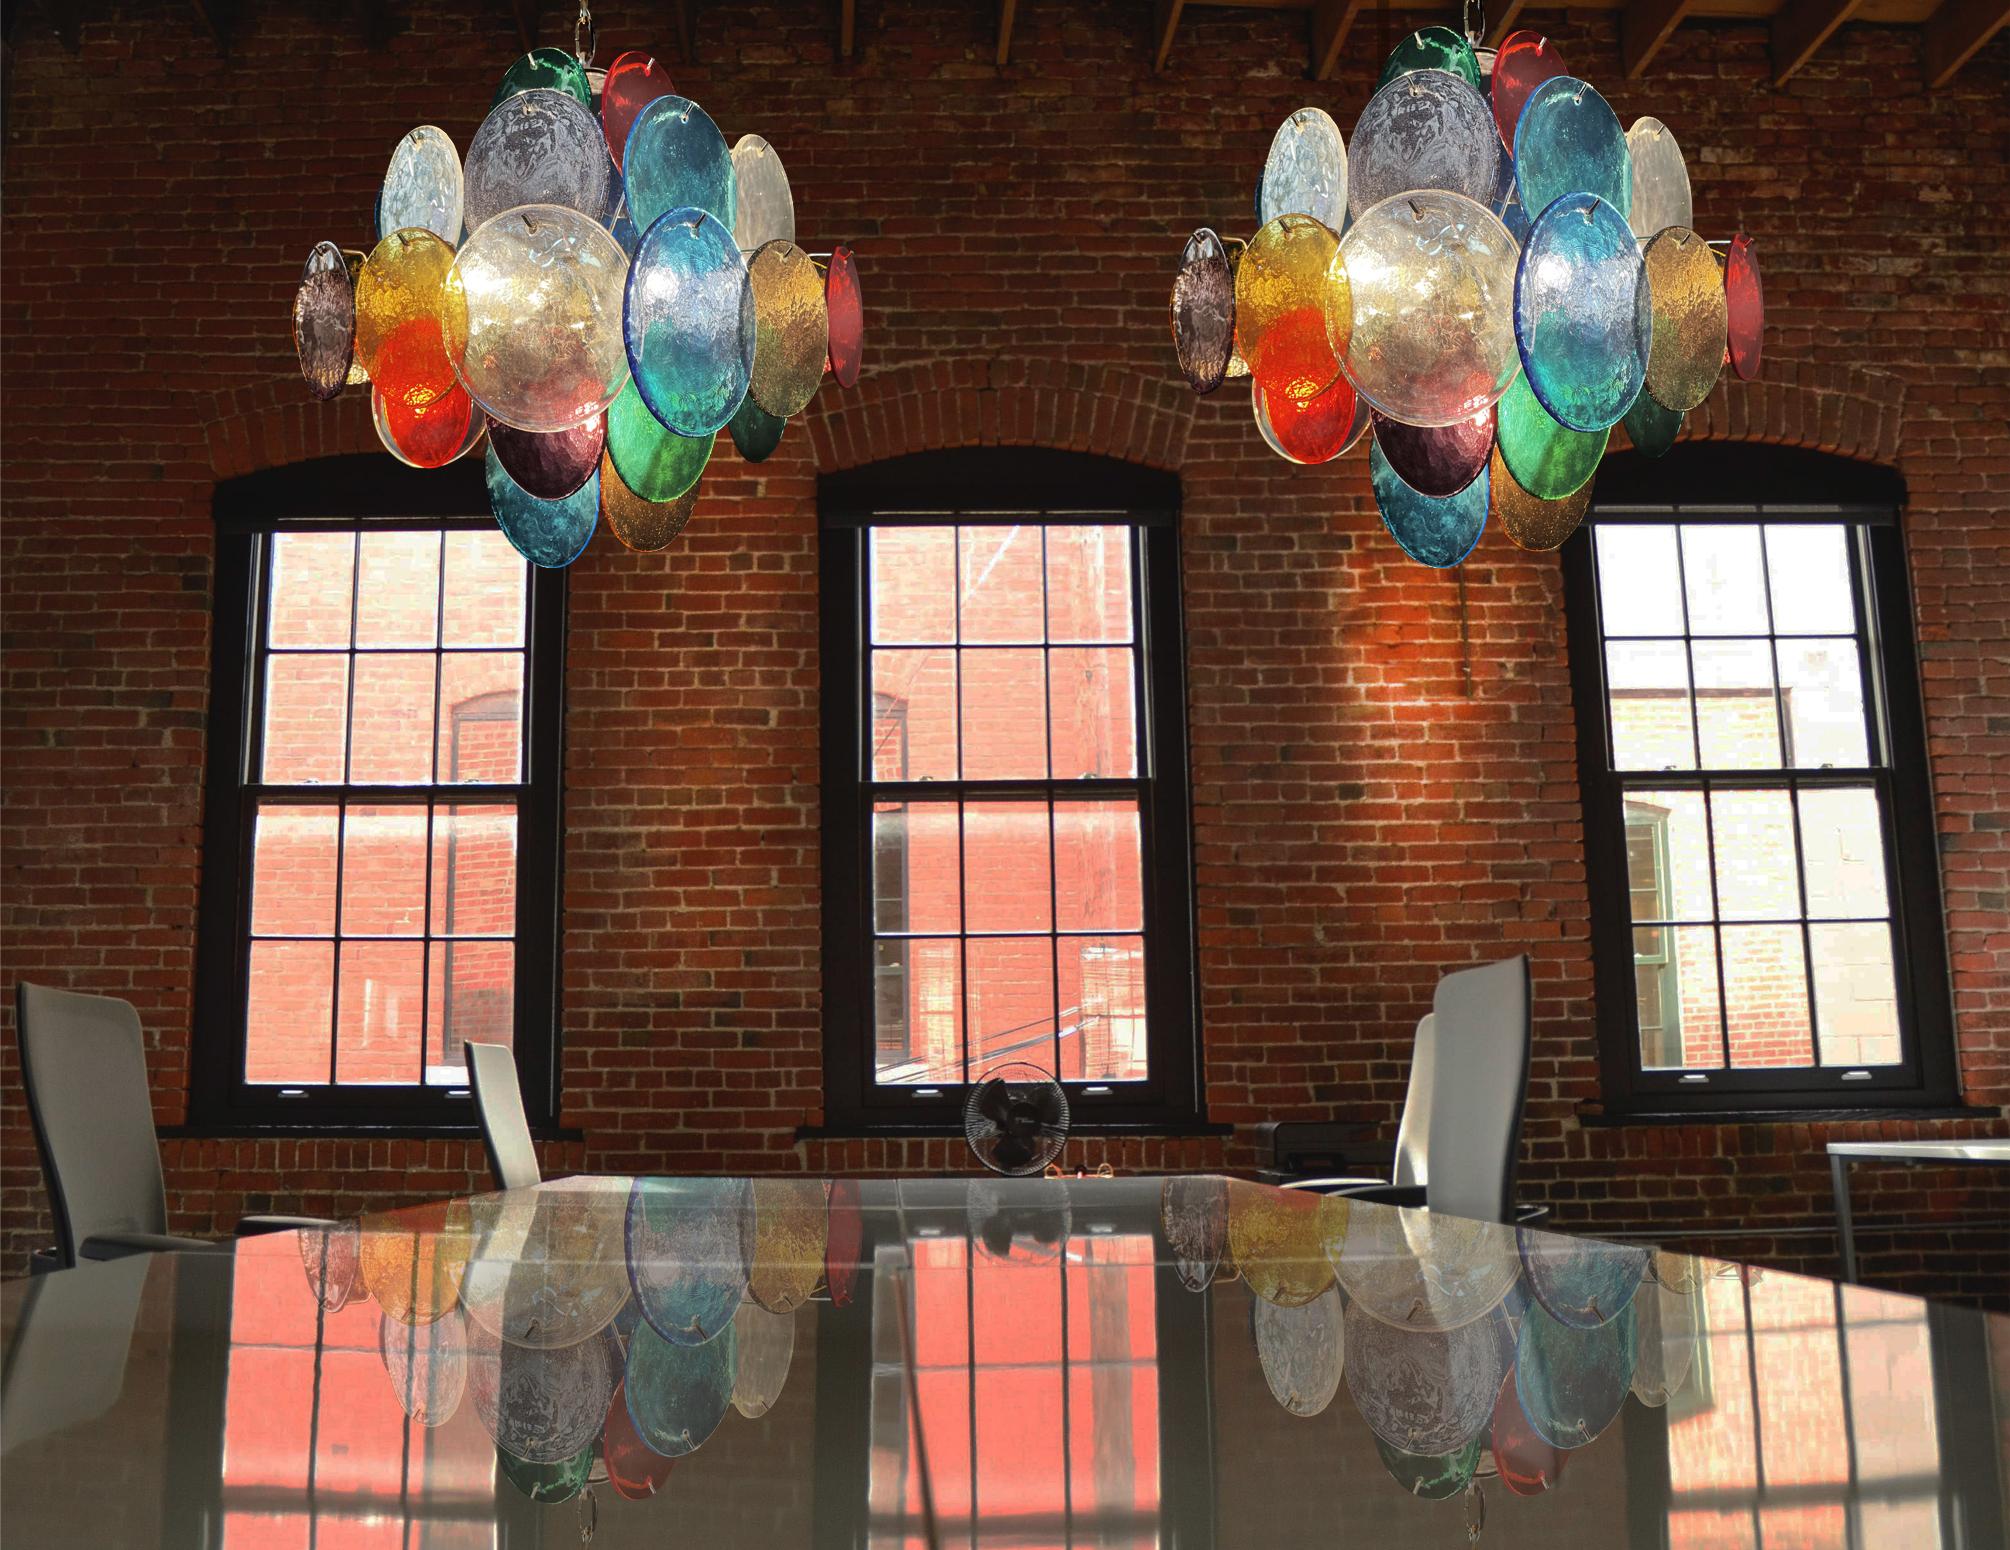 Trio Vintage Italian Murano chandeliers in Vistosi style. Each chandelier has 36 fantastic multicolored discs in a nickel metal frame.
Period: late XX century
Dimensions: 44,50 inches (150 cm) height with chain; 19,40 inches (50 cm) height without